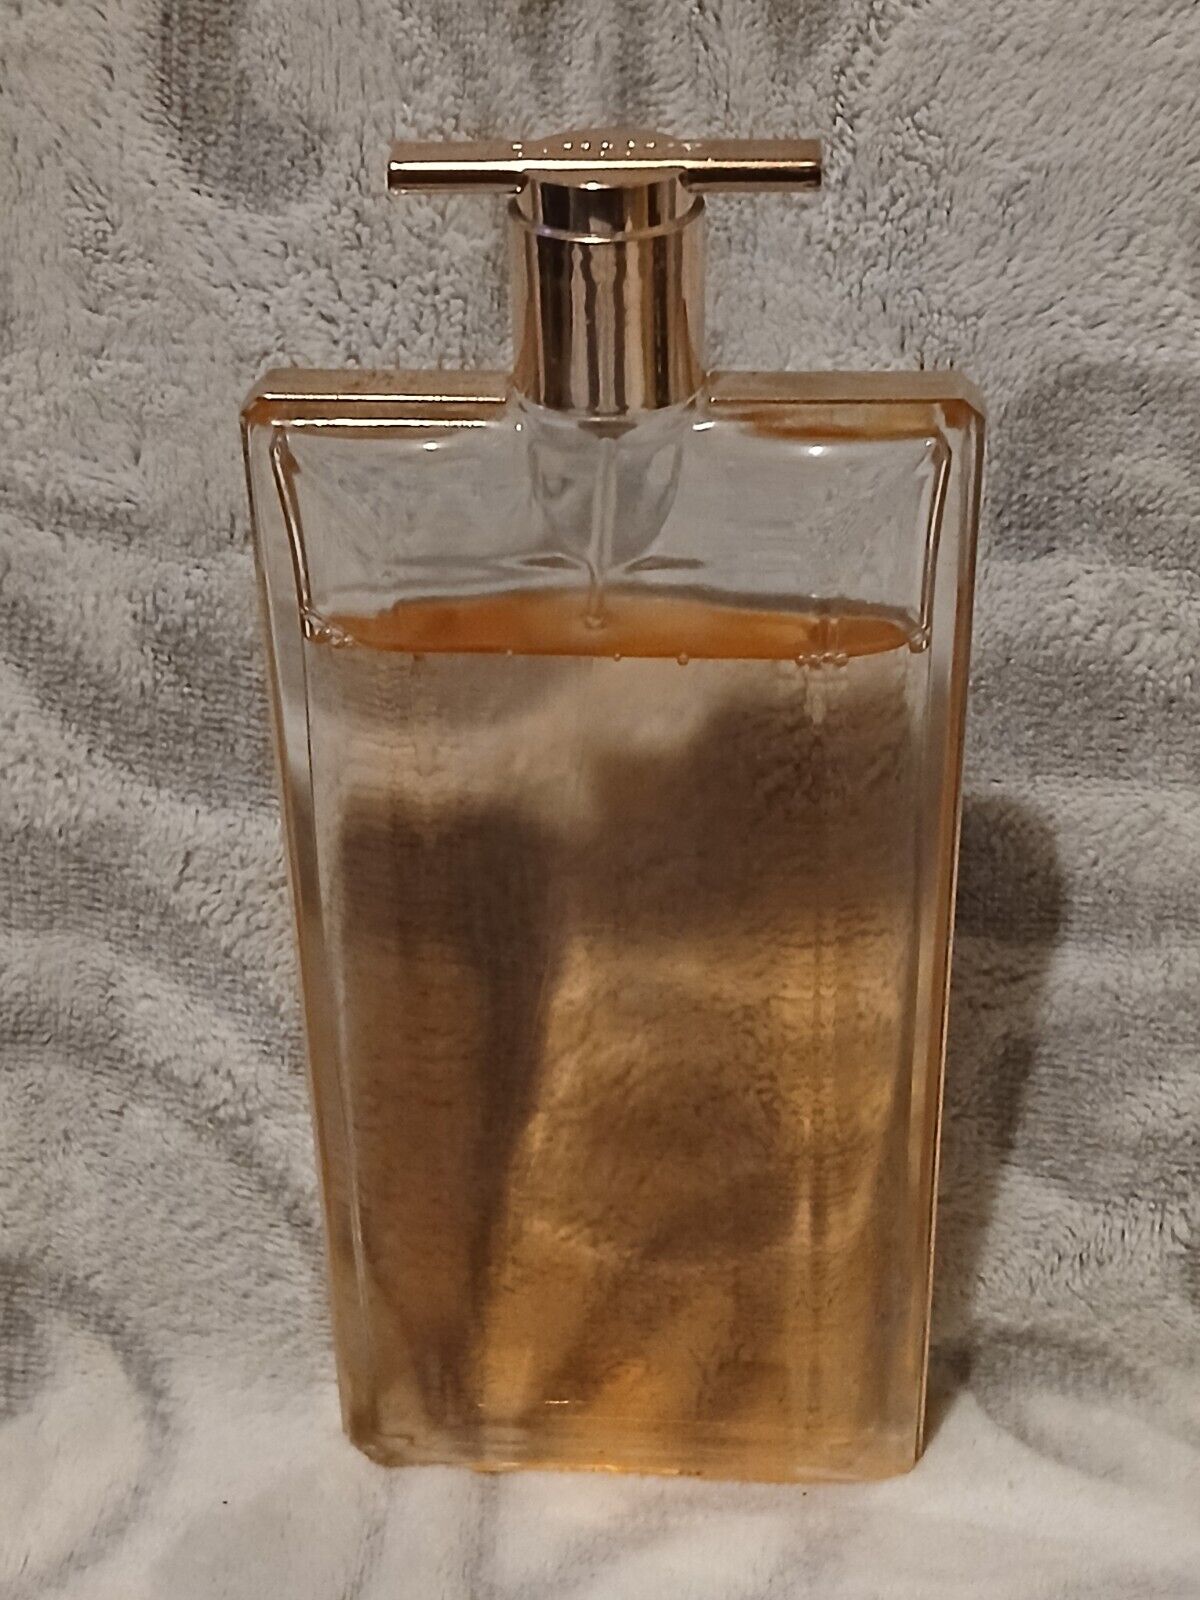 Idole by Lancome Le Parfum Spray 3.4oz 100ml About 80% Full Bottle *Authentic*